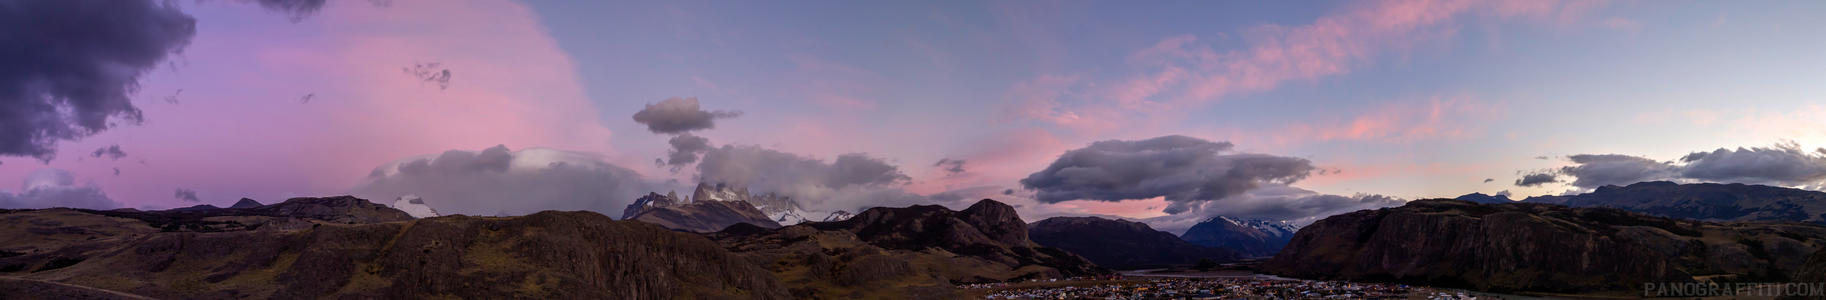 Dawn Sky Above El Chalten - An early morning view of Fitz Roy nestled behind El Chalten from a lookout behind the visitor center